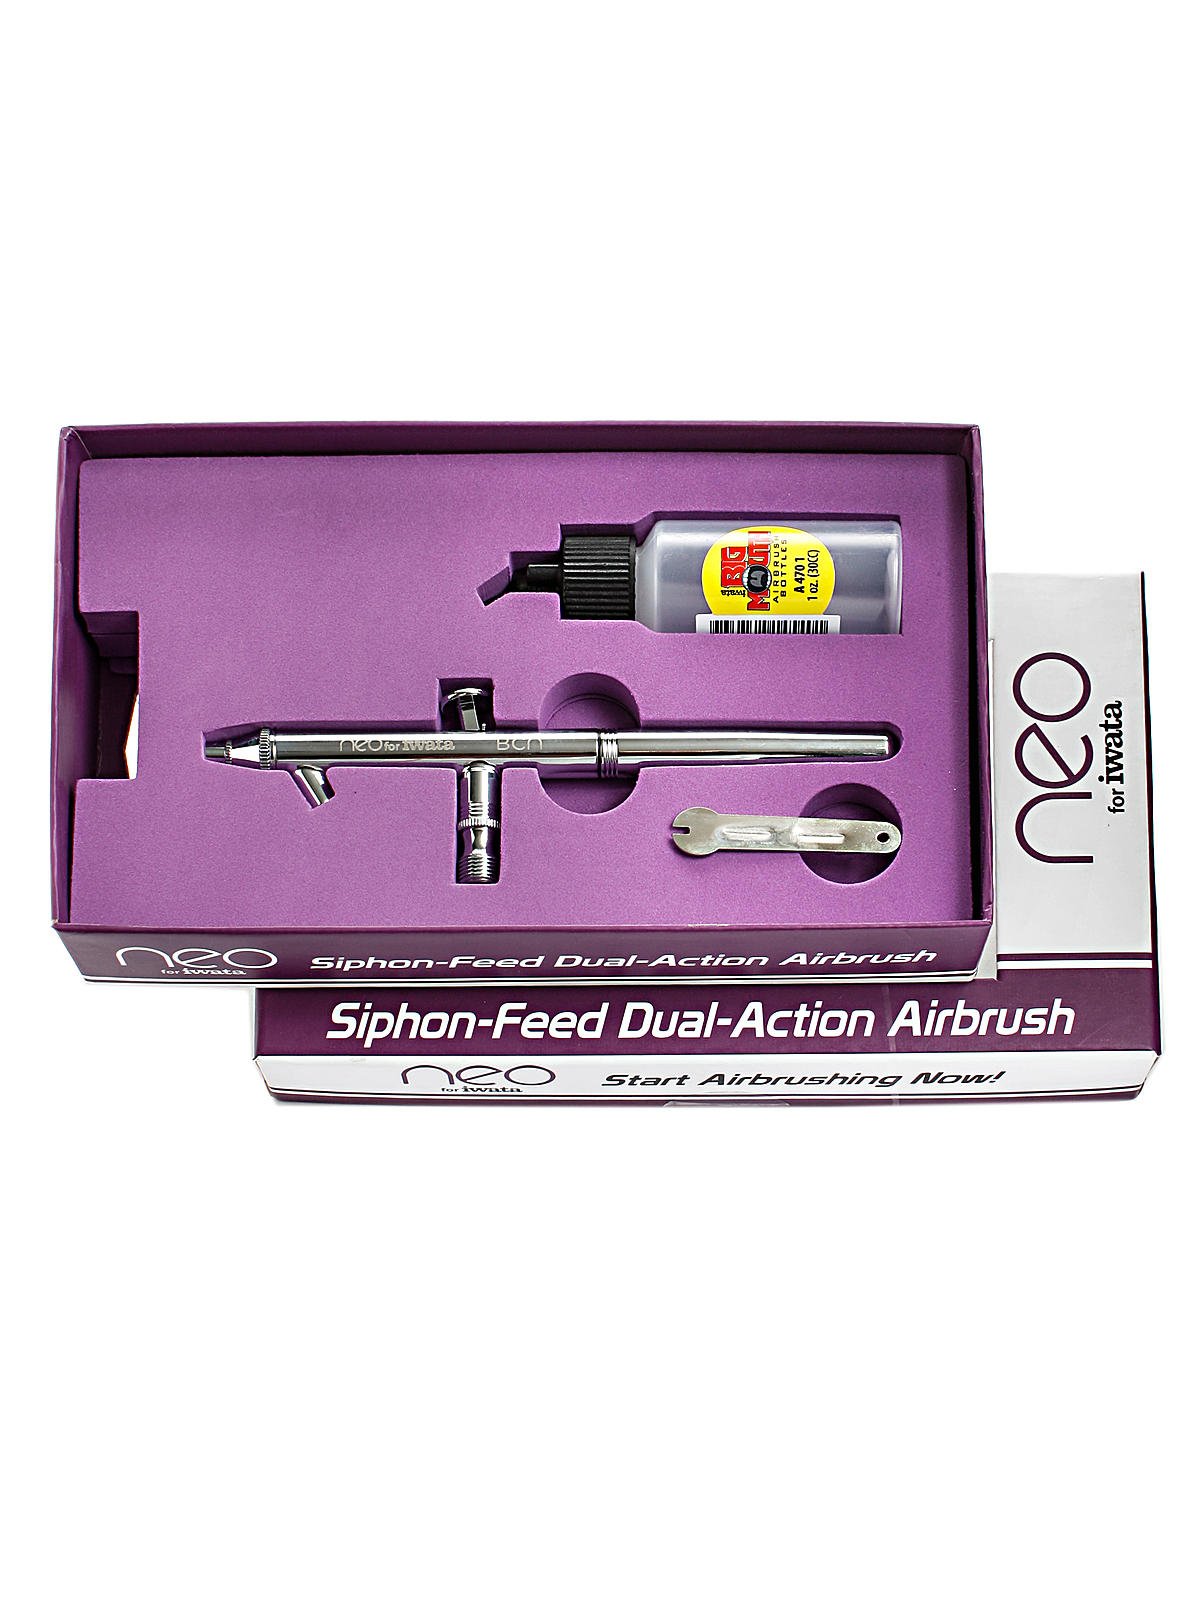 Neo for Iwata Airbrush - Tools & Paint Reviews 